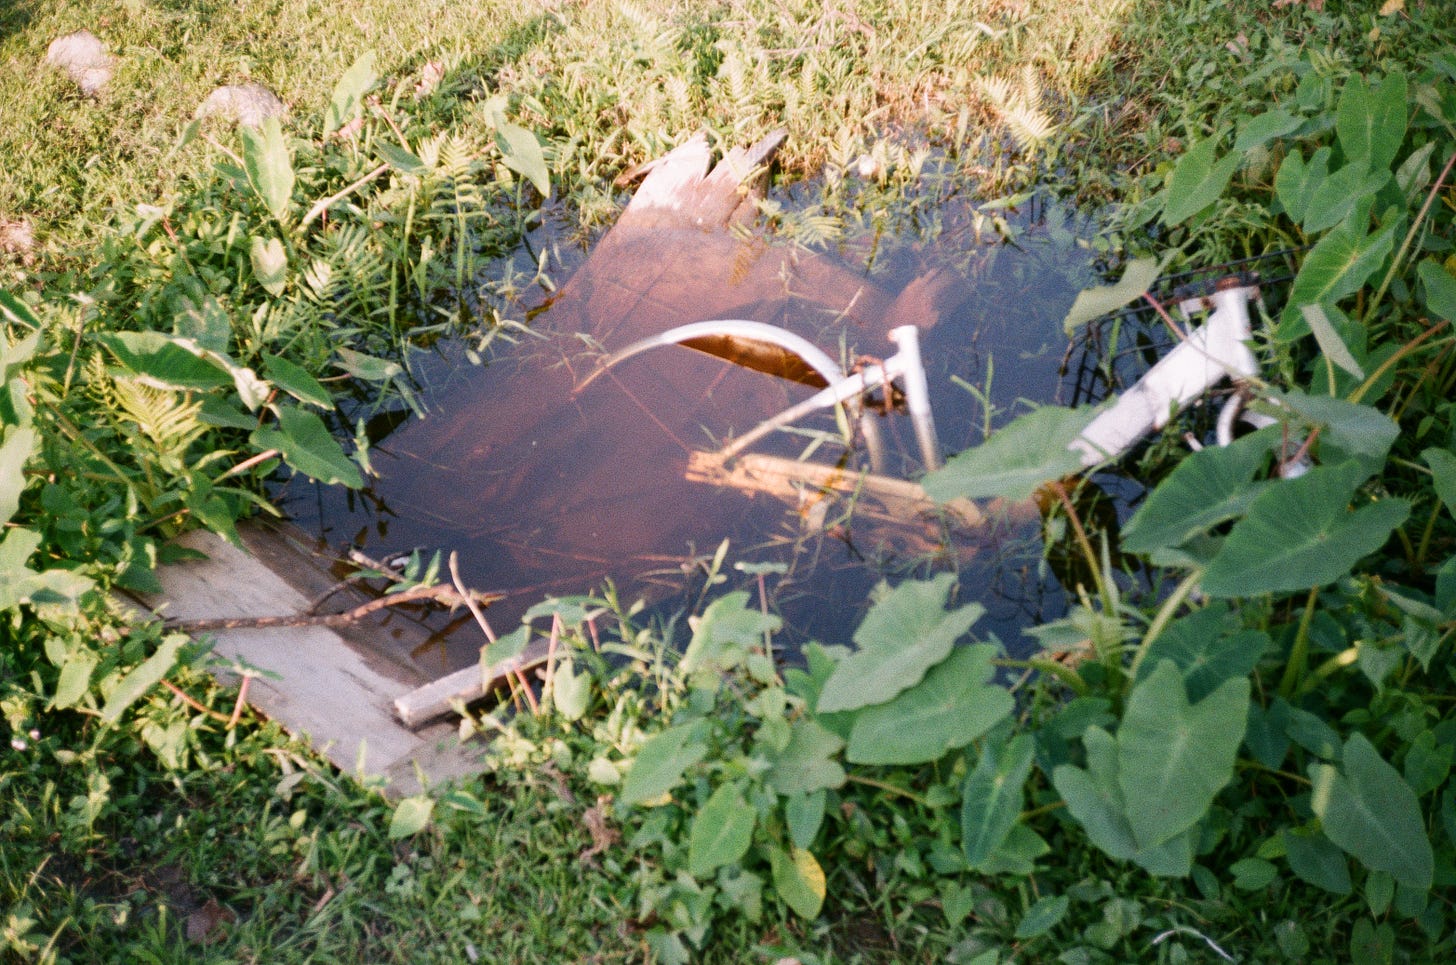 A bicycle and a plank of wood submerged in a ditch filled with water, surrounded by unattended lawn.